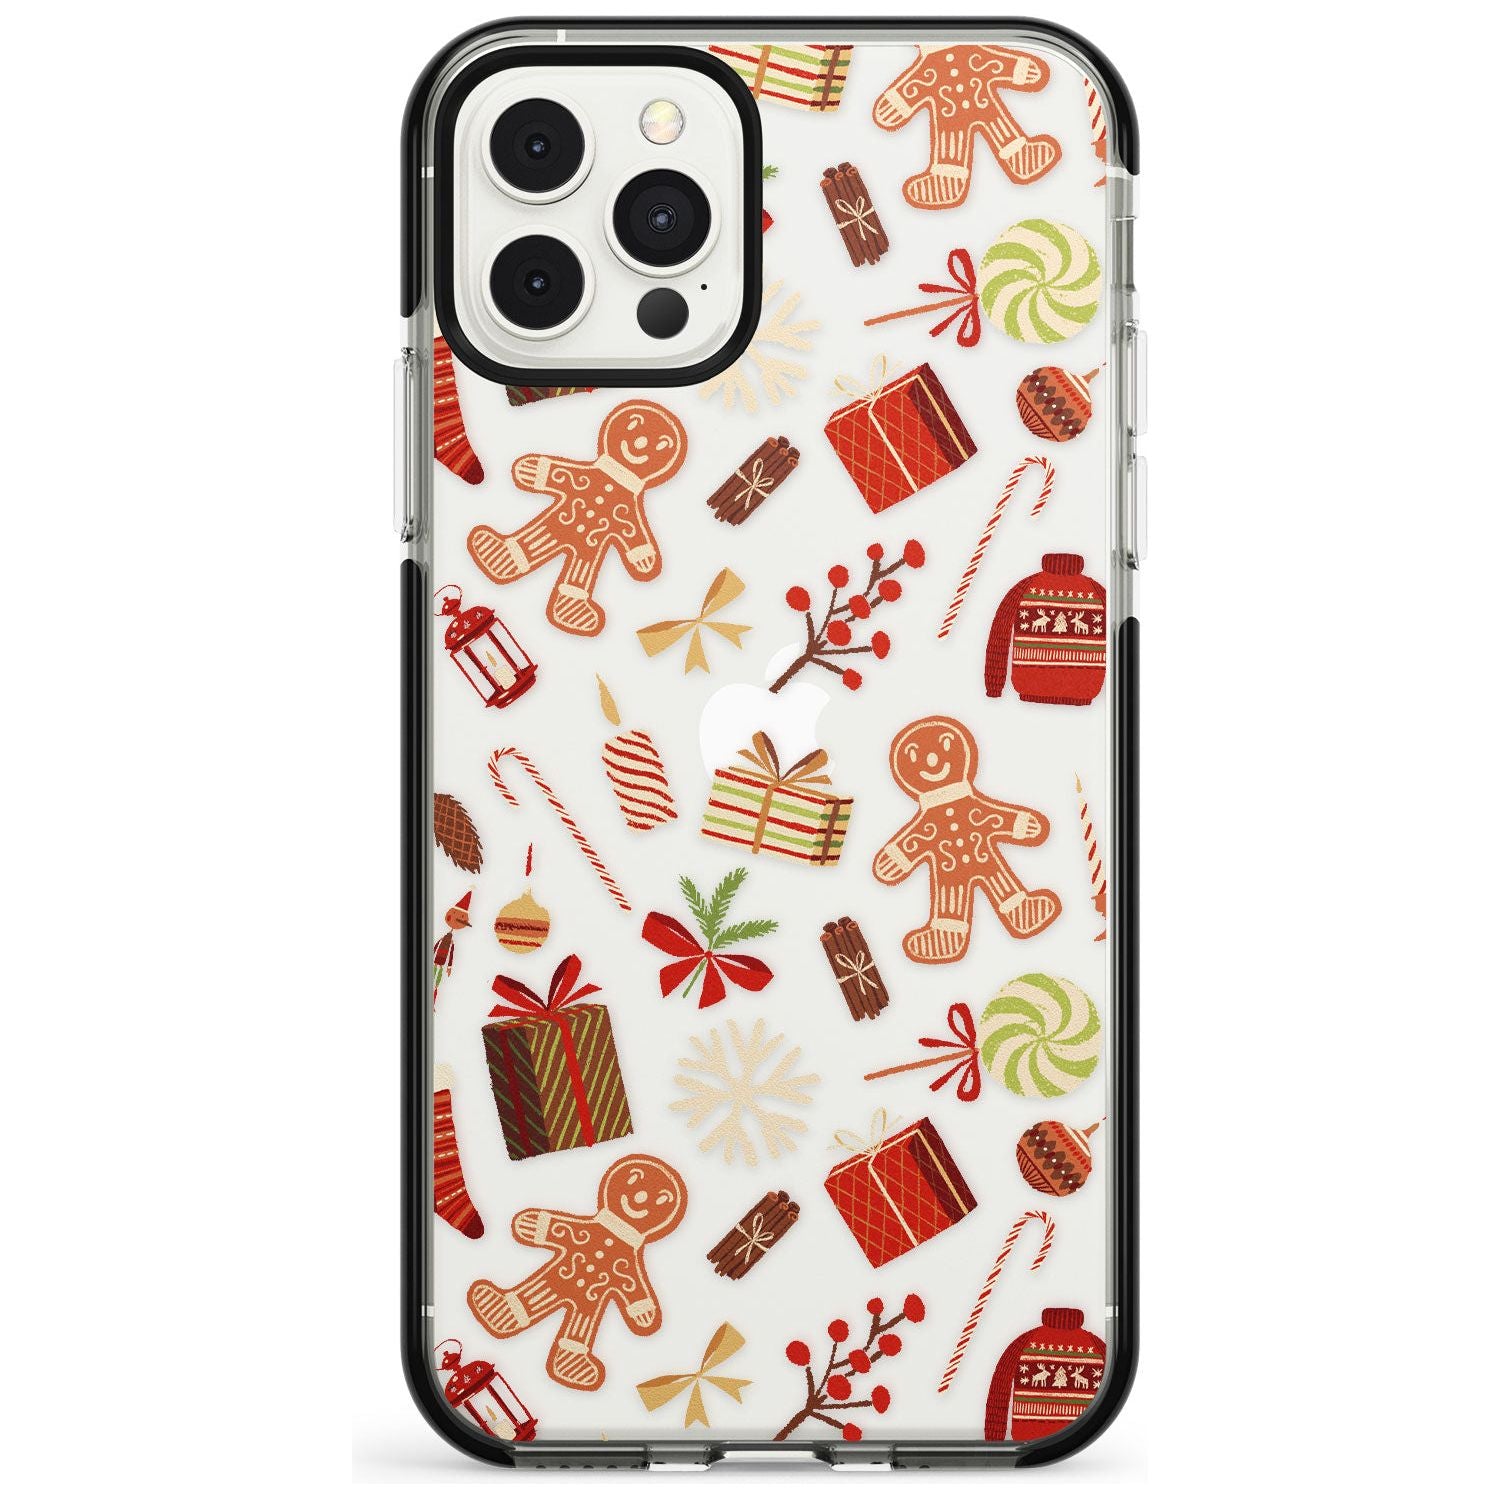 Christmas Assortments Black Impact Phone Case for iPhone 11